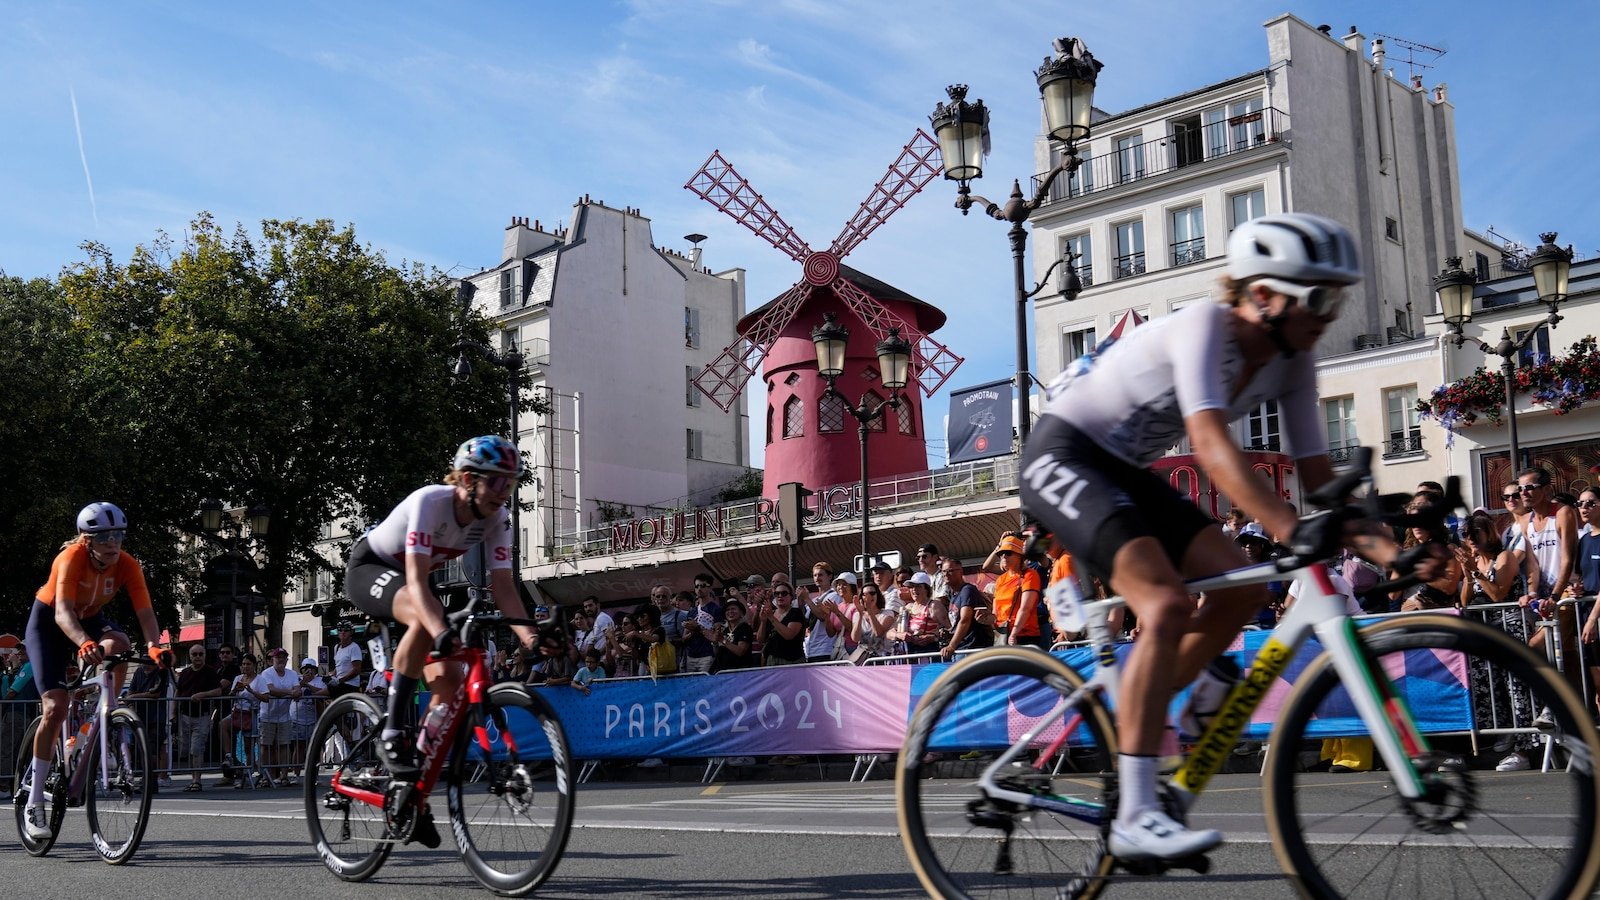 US rider Kristen Faulkner sprints clear to win women's road race at Paris Olympics